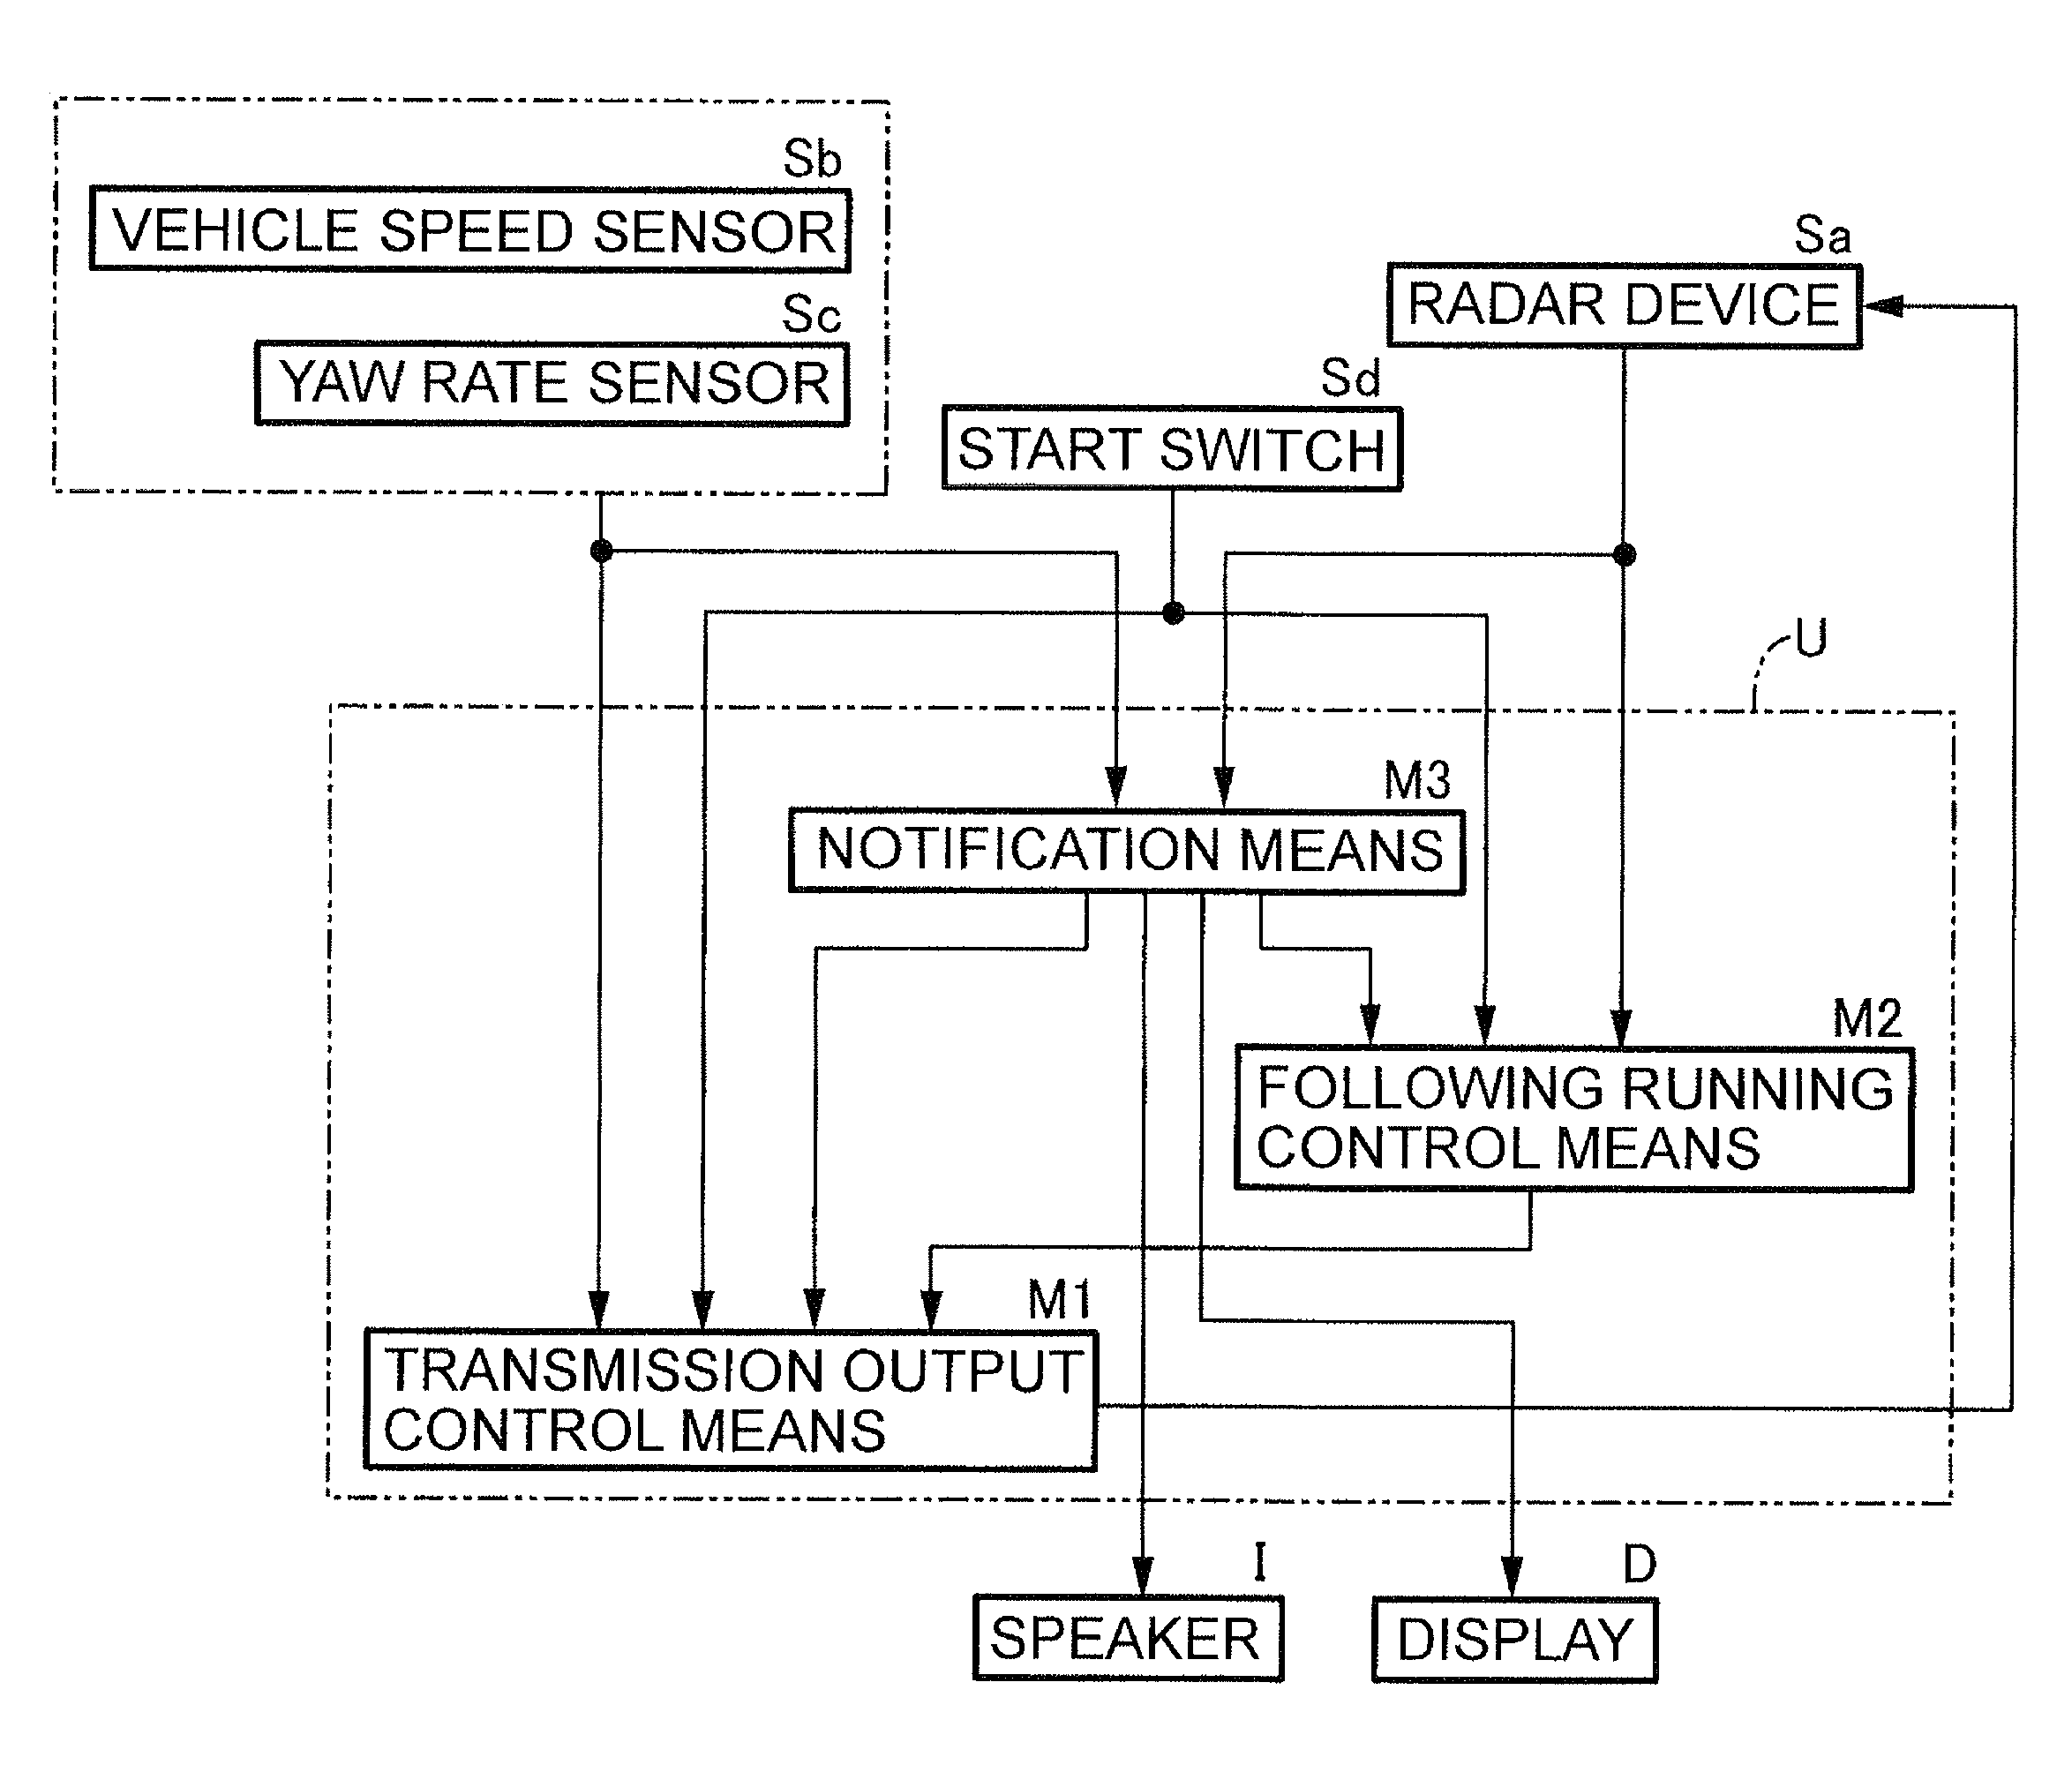 Running control system for vehicle